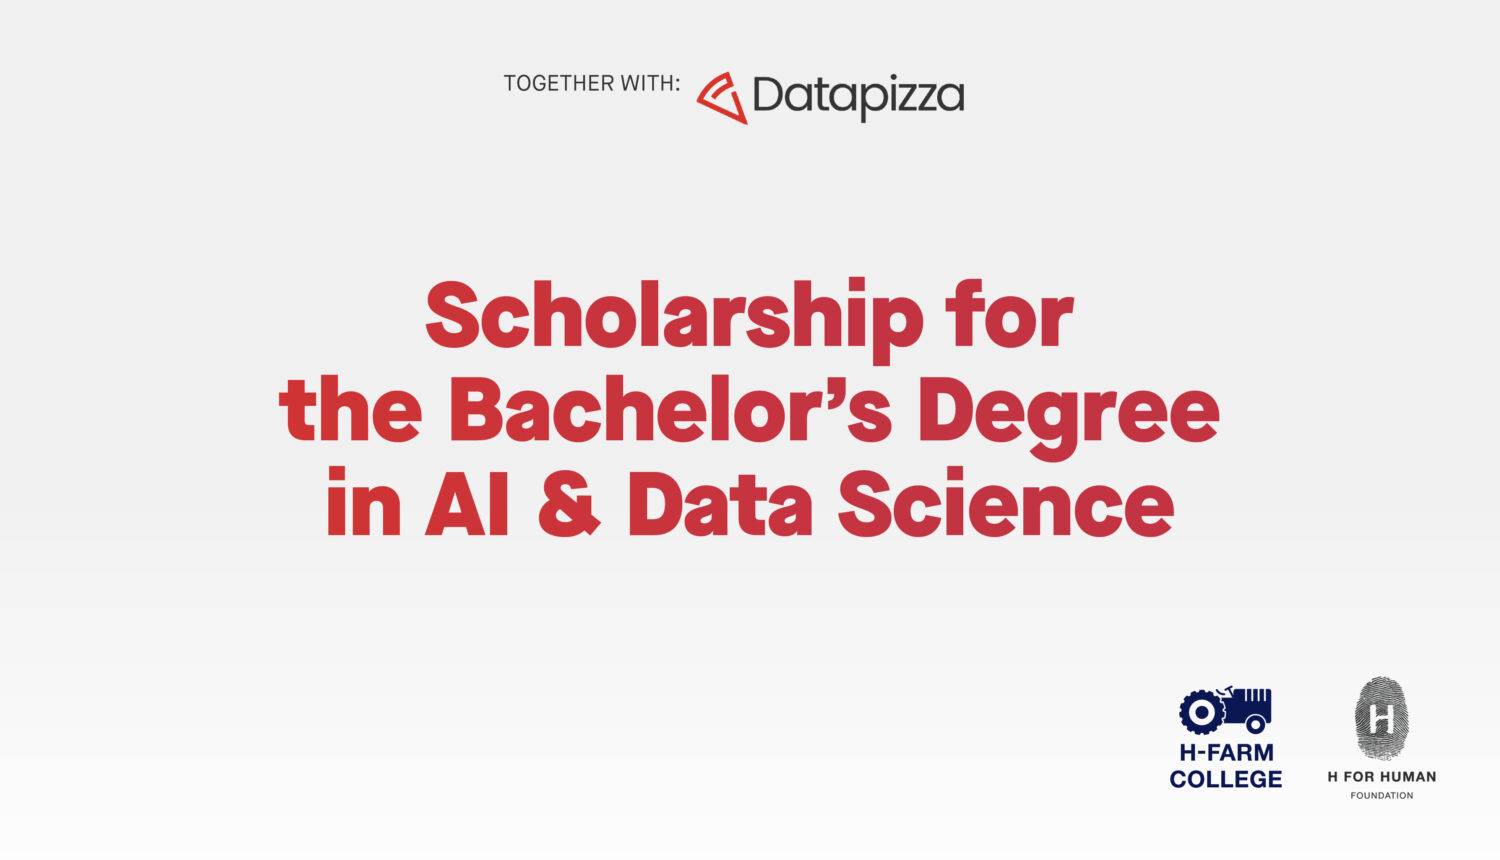 H-FARM College and the H for Human Foundation, together with Datapizza, provide a scholarship for the BSc in AI & Data Science